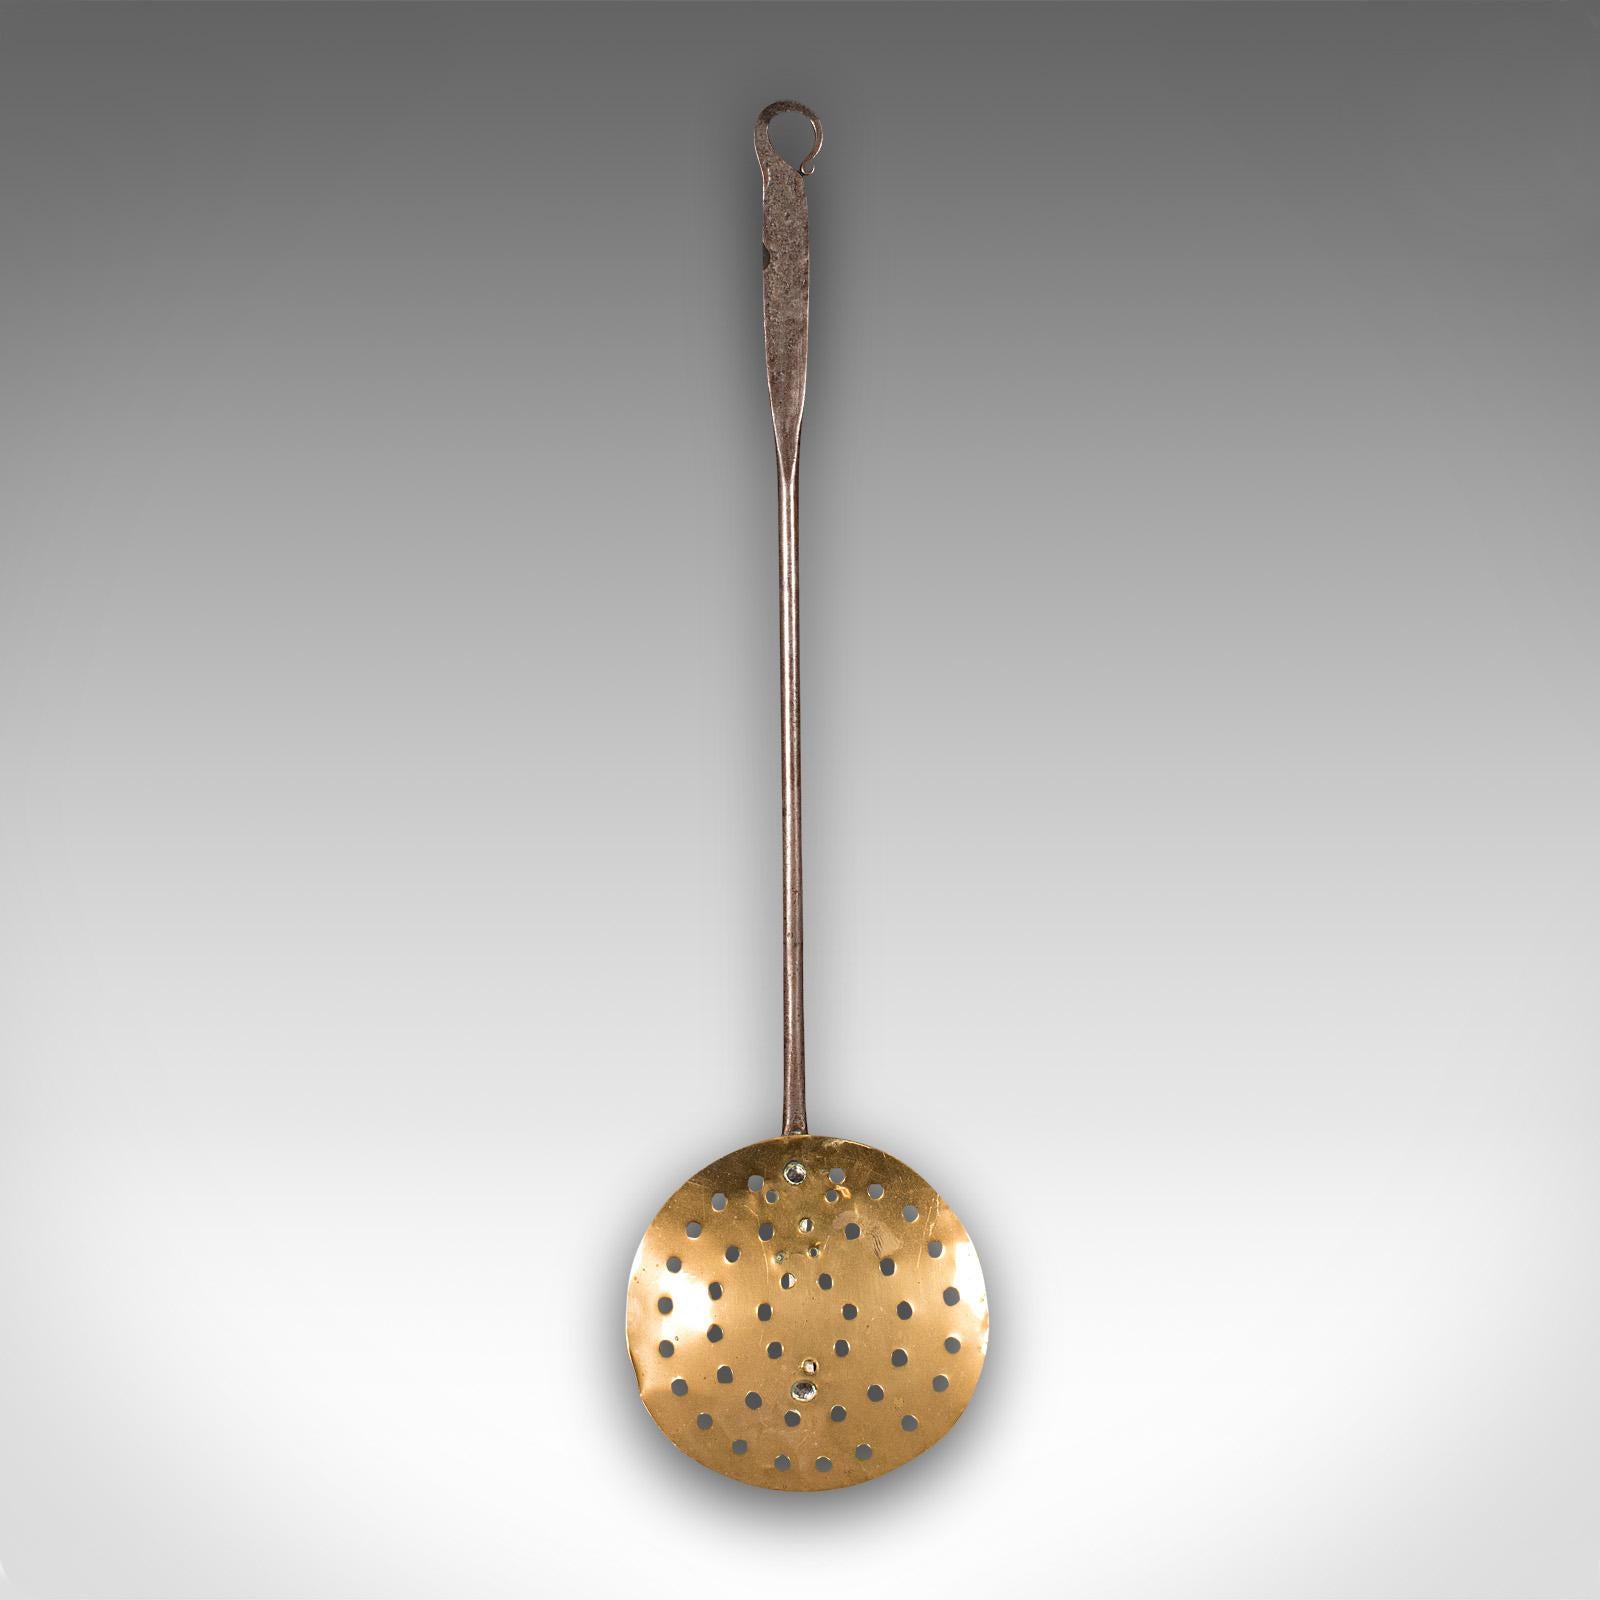 This is an antique chestnut warmer. An English, brass and cast iron fireplace roaster or ladle, dating to the Georgian period, circa 1800.

Fascinating fireside tool or decorative roaster from the Georgian period
Displays a desirable aged patina